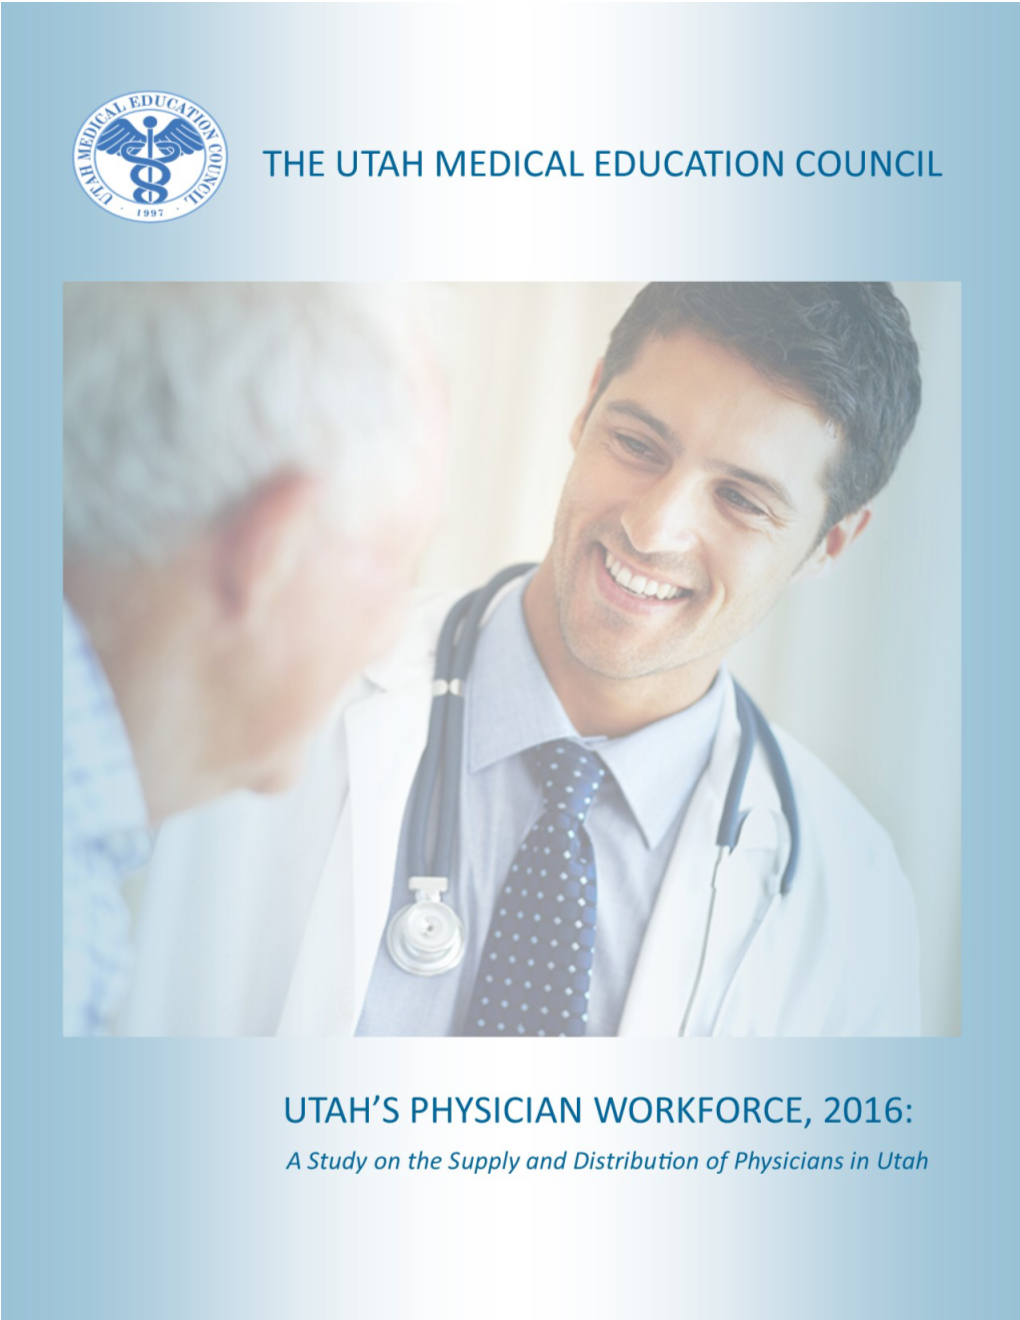 Utah's Physician Workforce, 2016: a Study of the Supply and Distribution